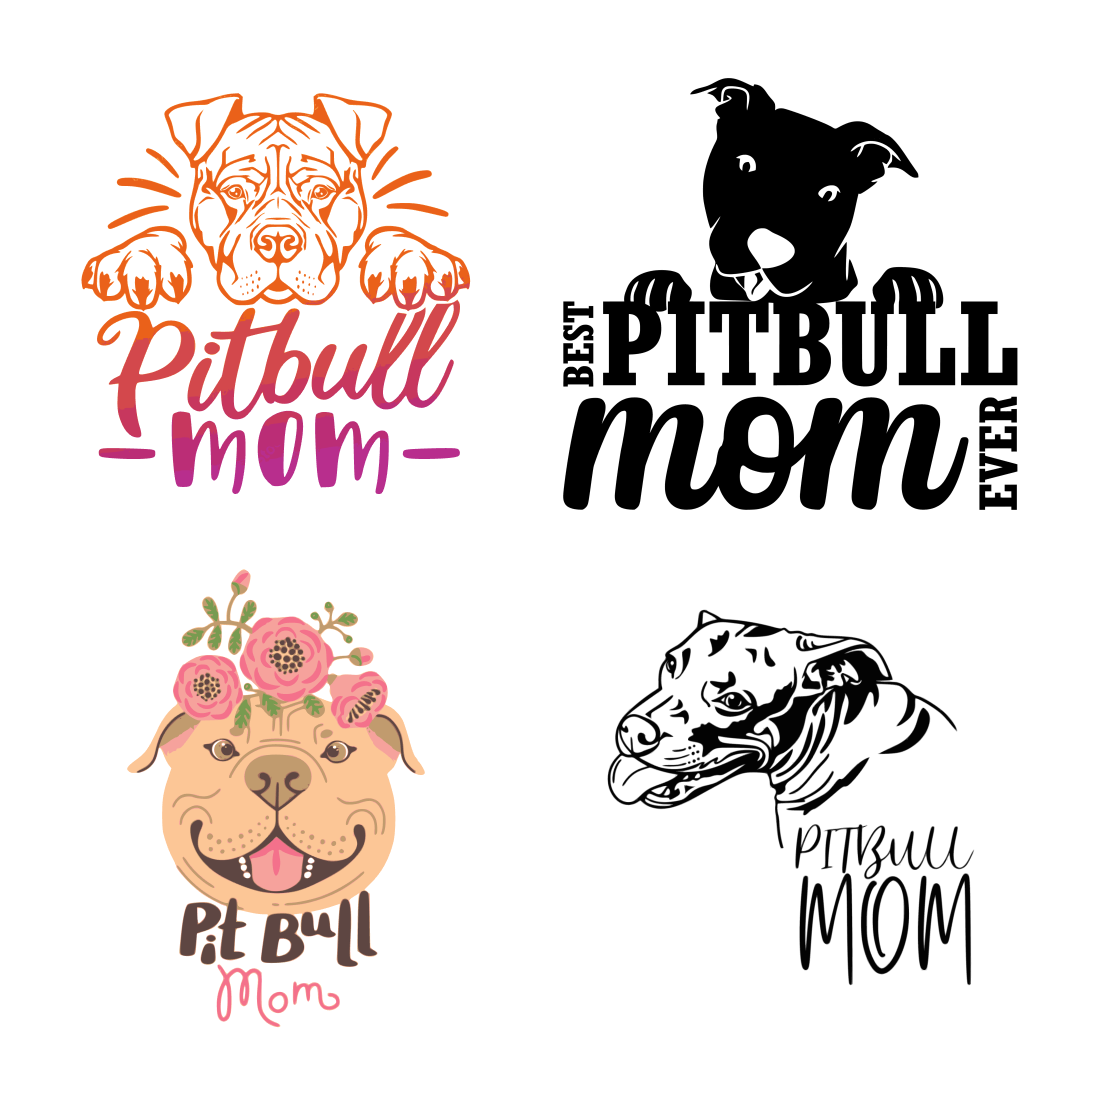 Set of four different types of pitbull mom stickers.